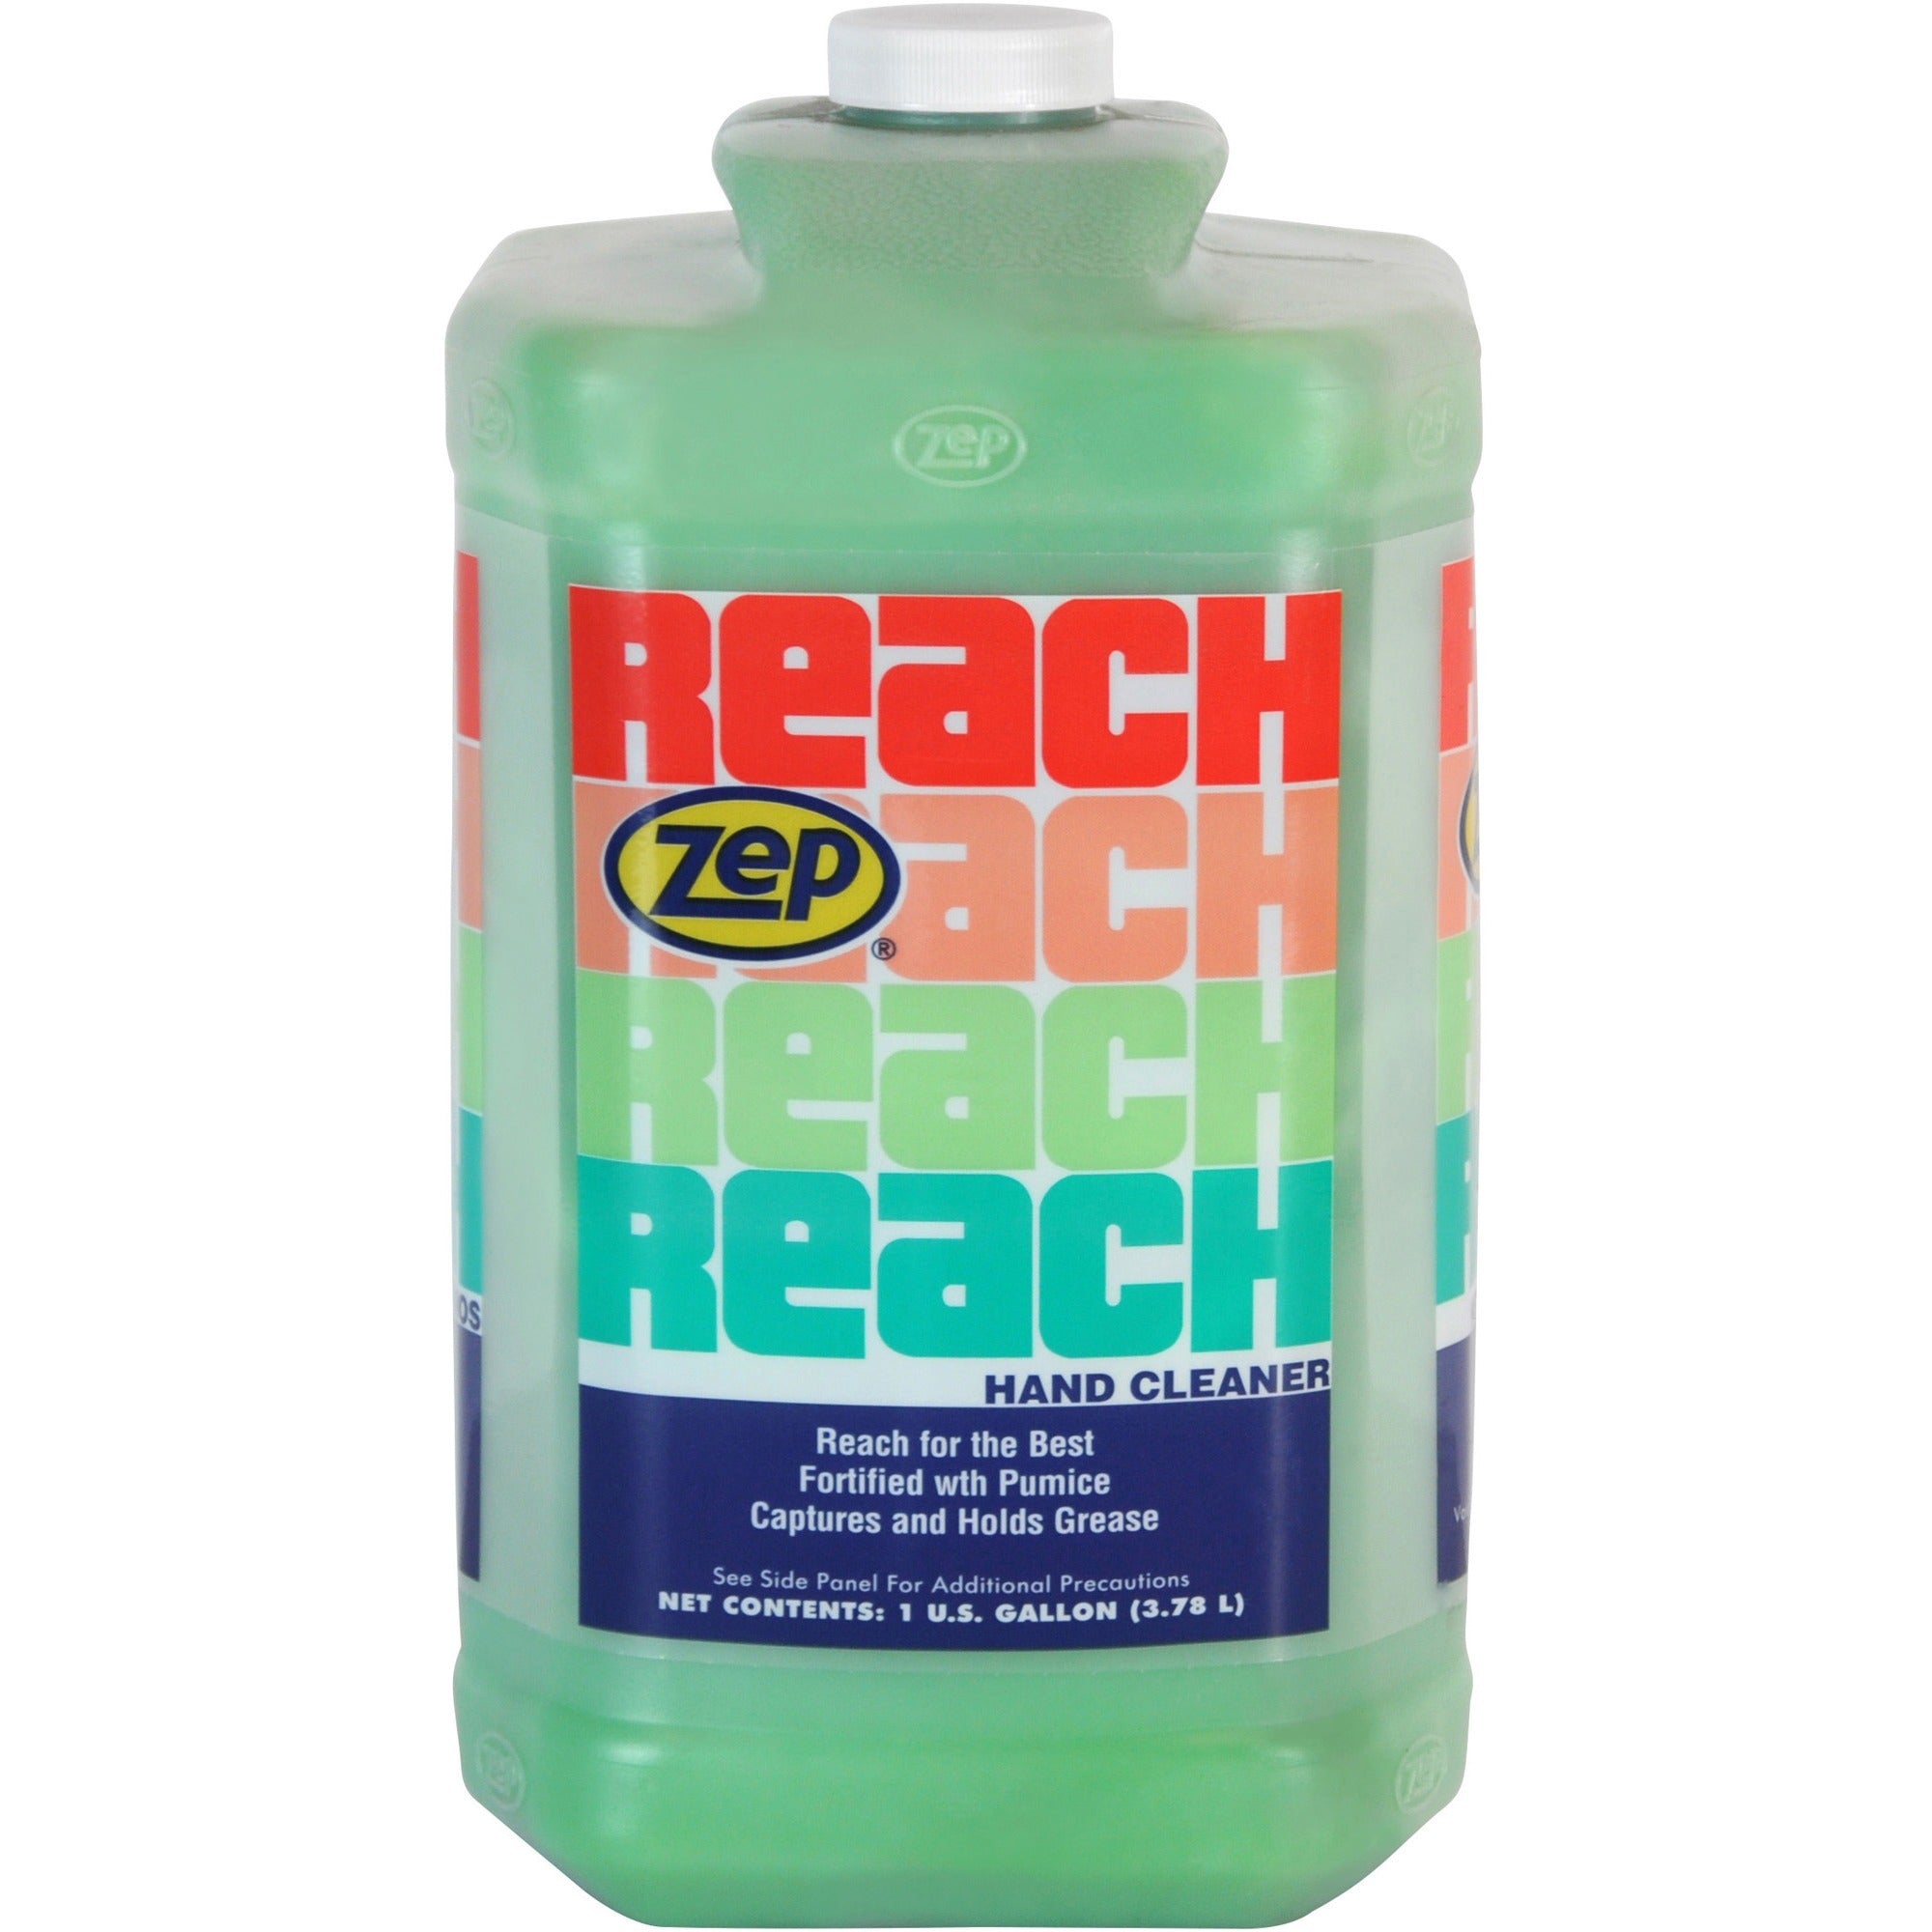 Zep Reach Hand Cleaner - Almond ScentFor - 1 gal (3.8 L) - Grease Remover, Resin Remover, Ink Remover, Tar Remover, Adhesive Remover, Oil Remover, Adhesive Remover, Grease Remover, Asphalt Remover, Oil Remover - Hand - Light Green, Opaque - Phosphate